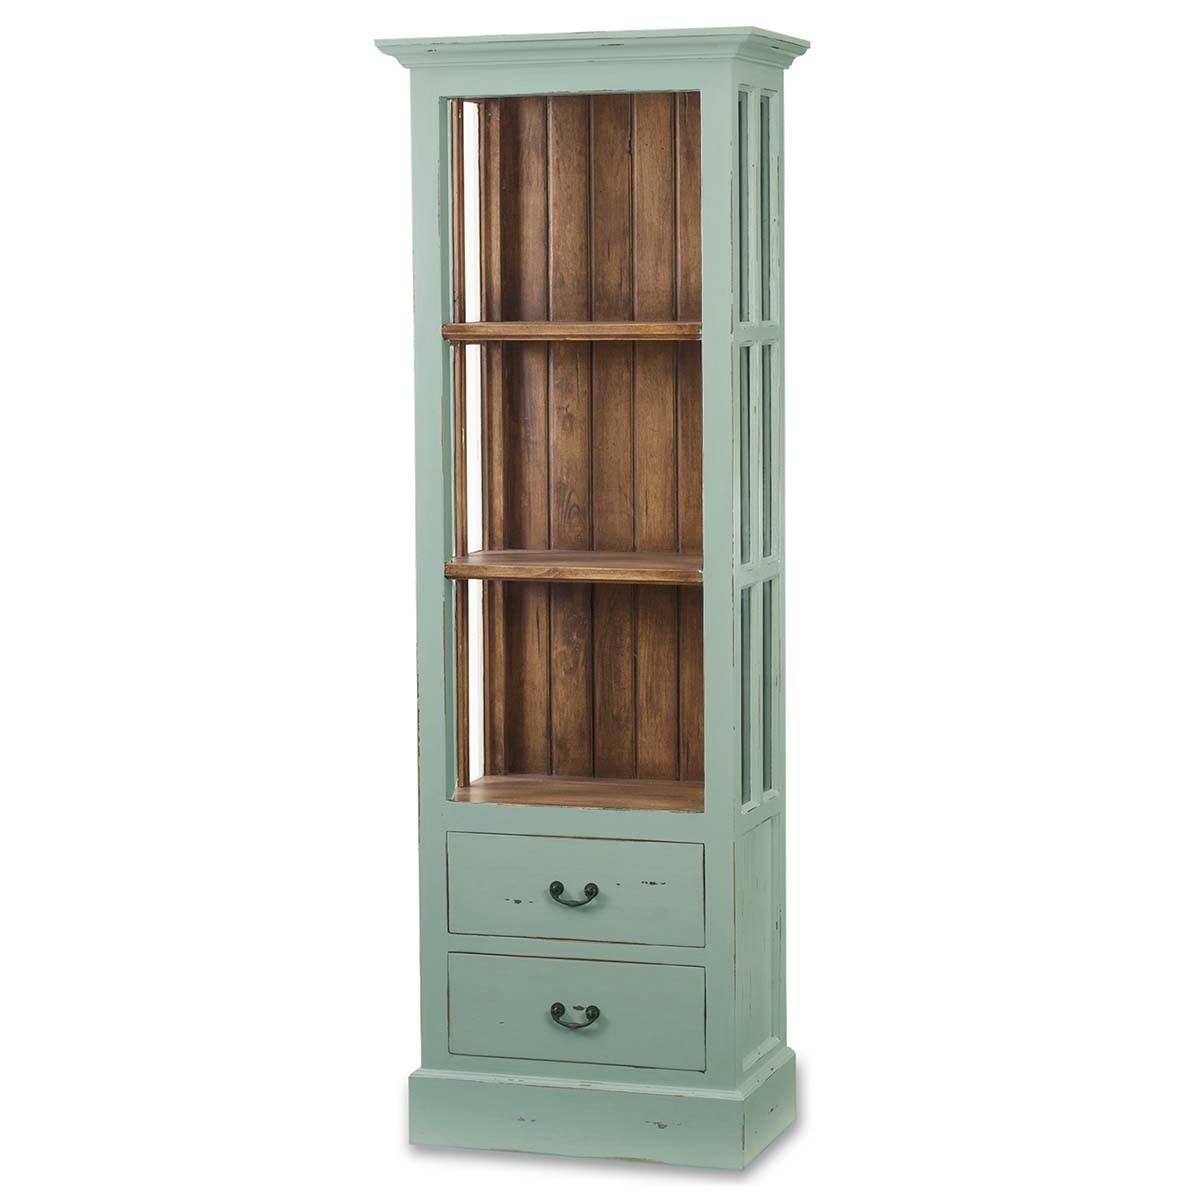 

    
Home Office Bookcase Solid Wood DUCK EGG BLUE Cape Cod Bramble 21812 Sp Order
